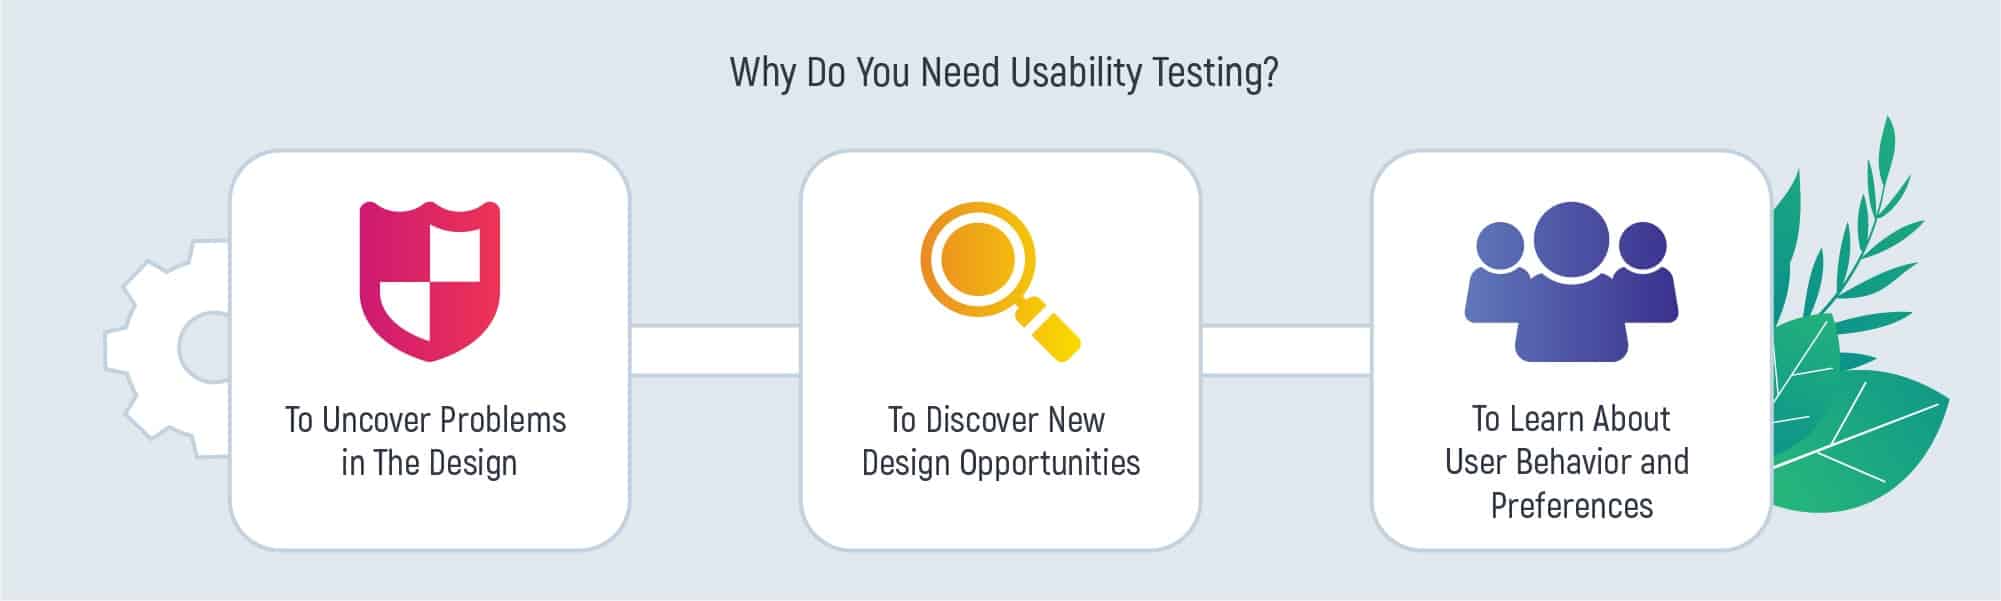 Explore All Benefits of Usability Testing For Step-By-Step Growing